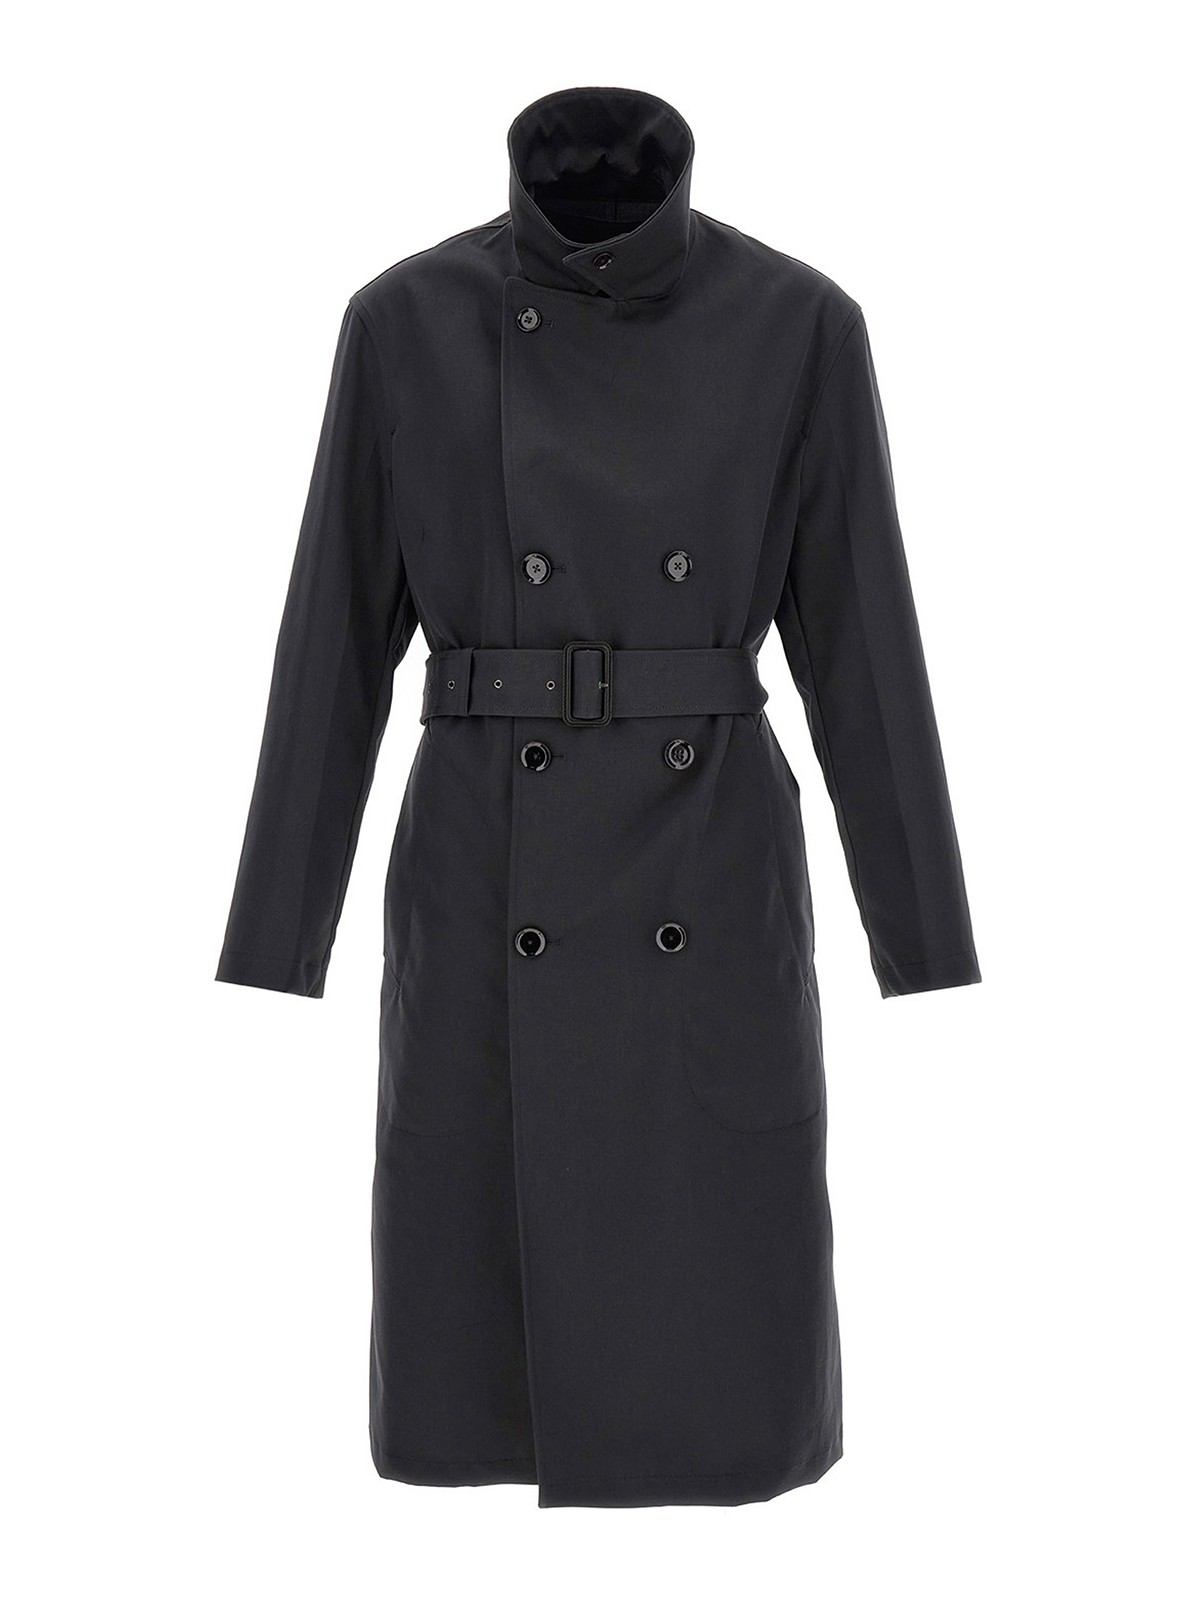 Trench coats Lemaire - Military trench coat - CO1007LF1044959